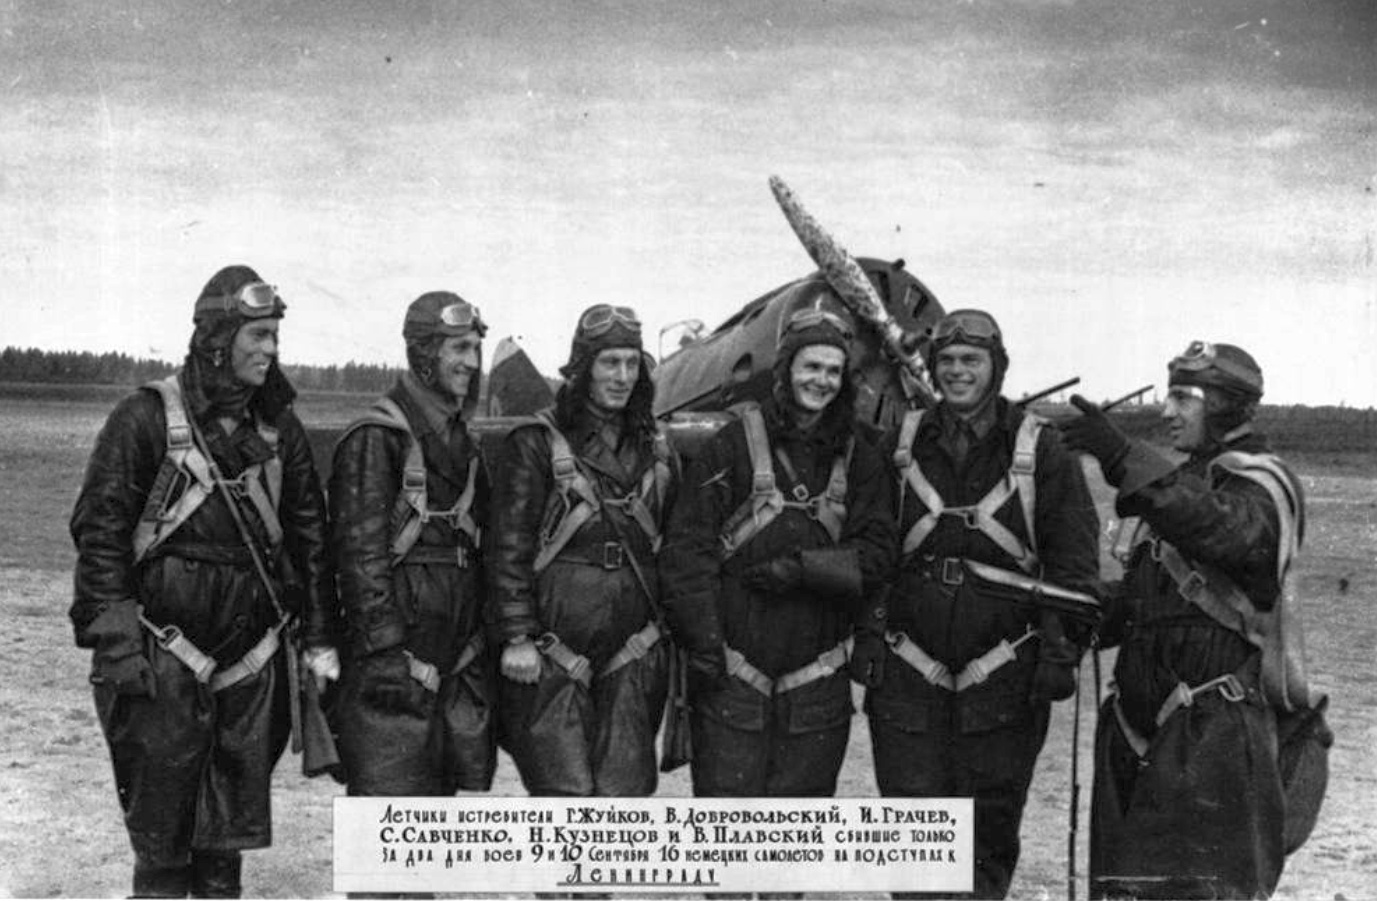 Russian I16 wartime picture